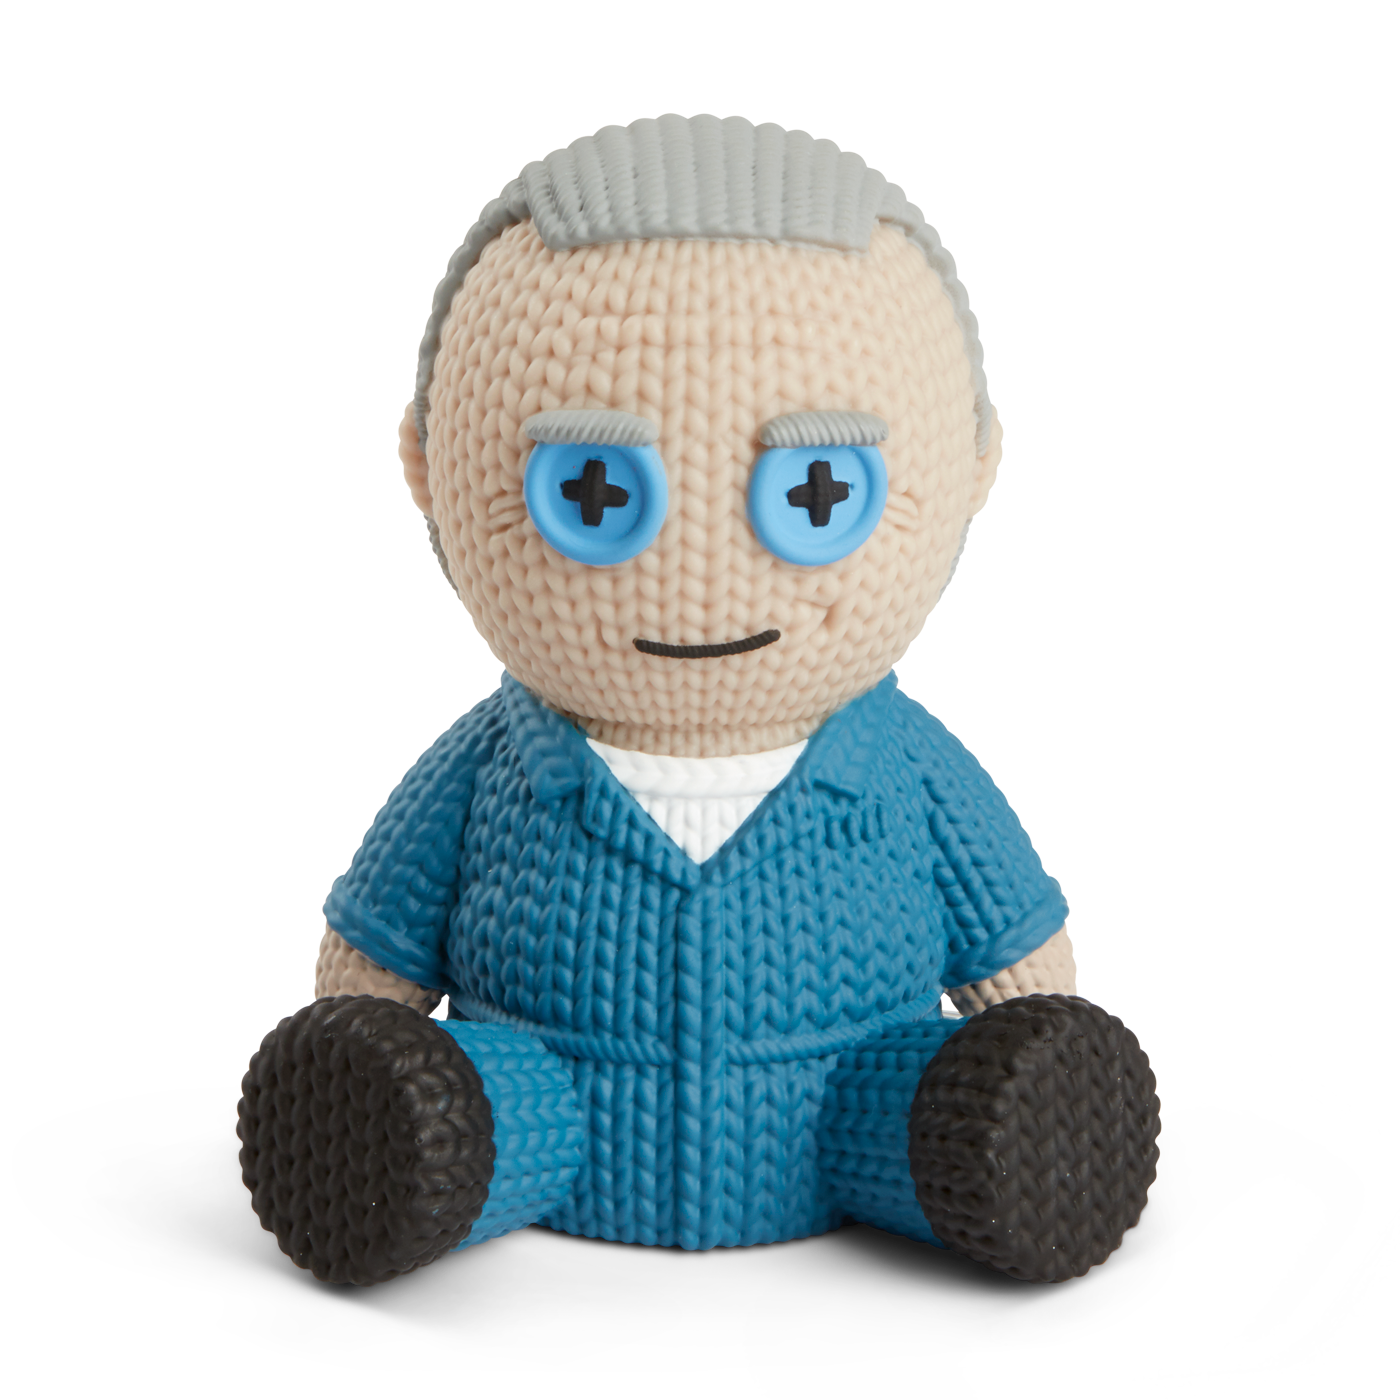 Handmade by Robots Knit Series Silence of the Lambs Hannibal Lecter in Blue Jumpsuit 5-in Vinyl Figure (GameStop)